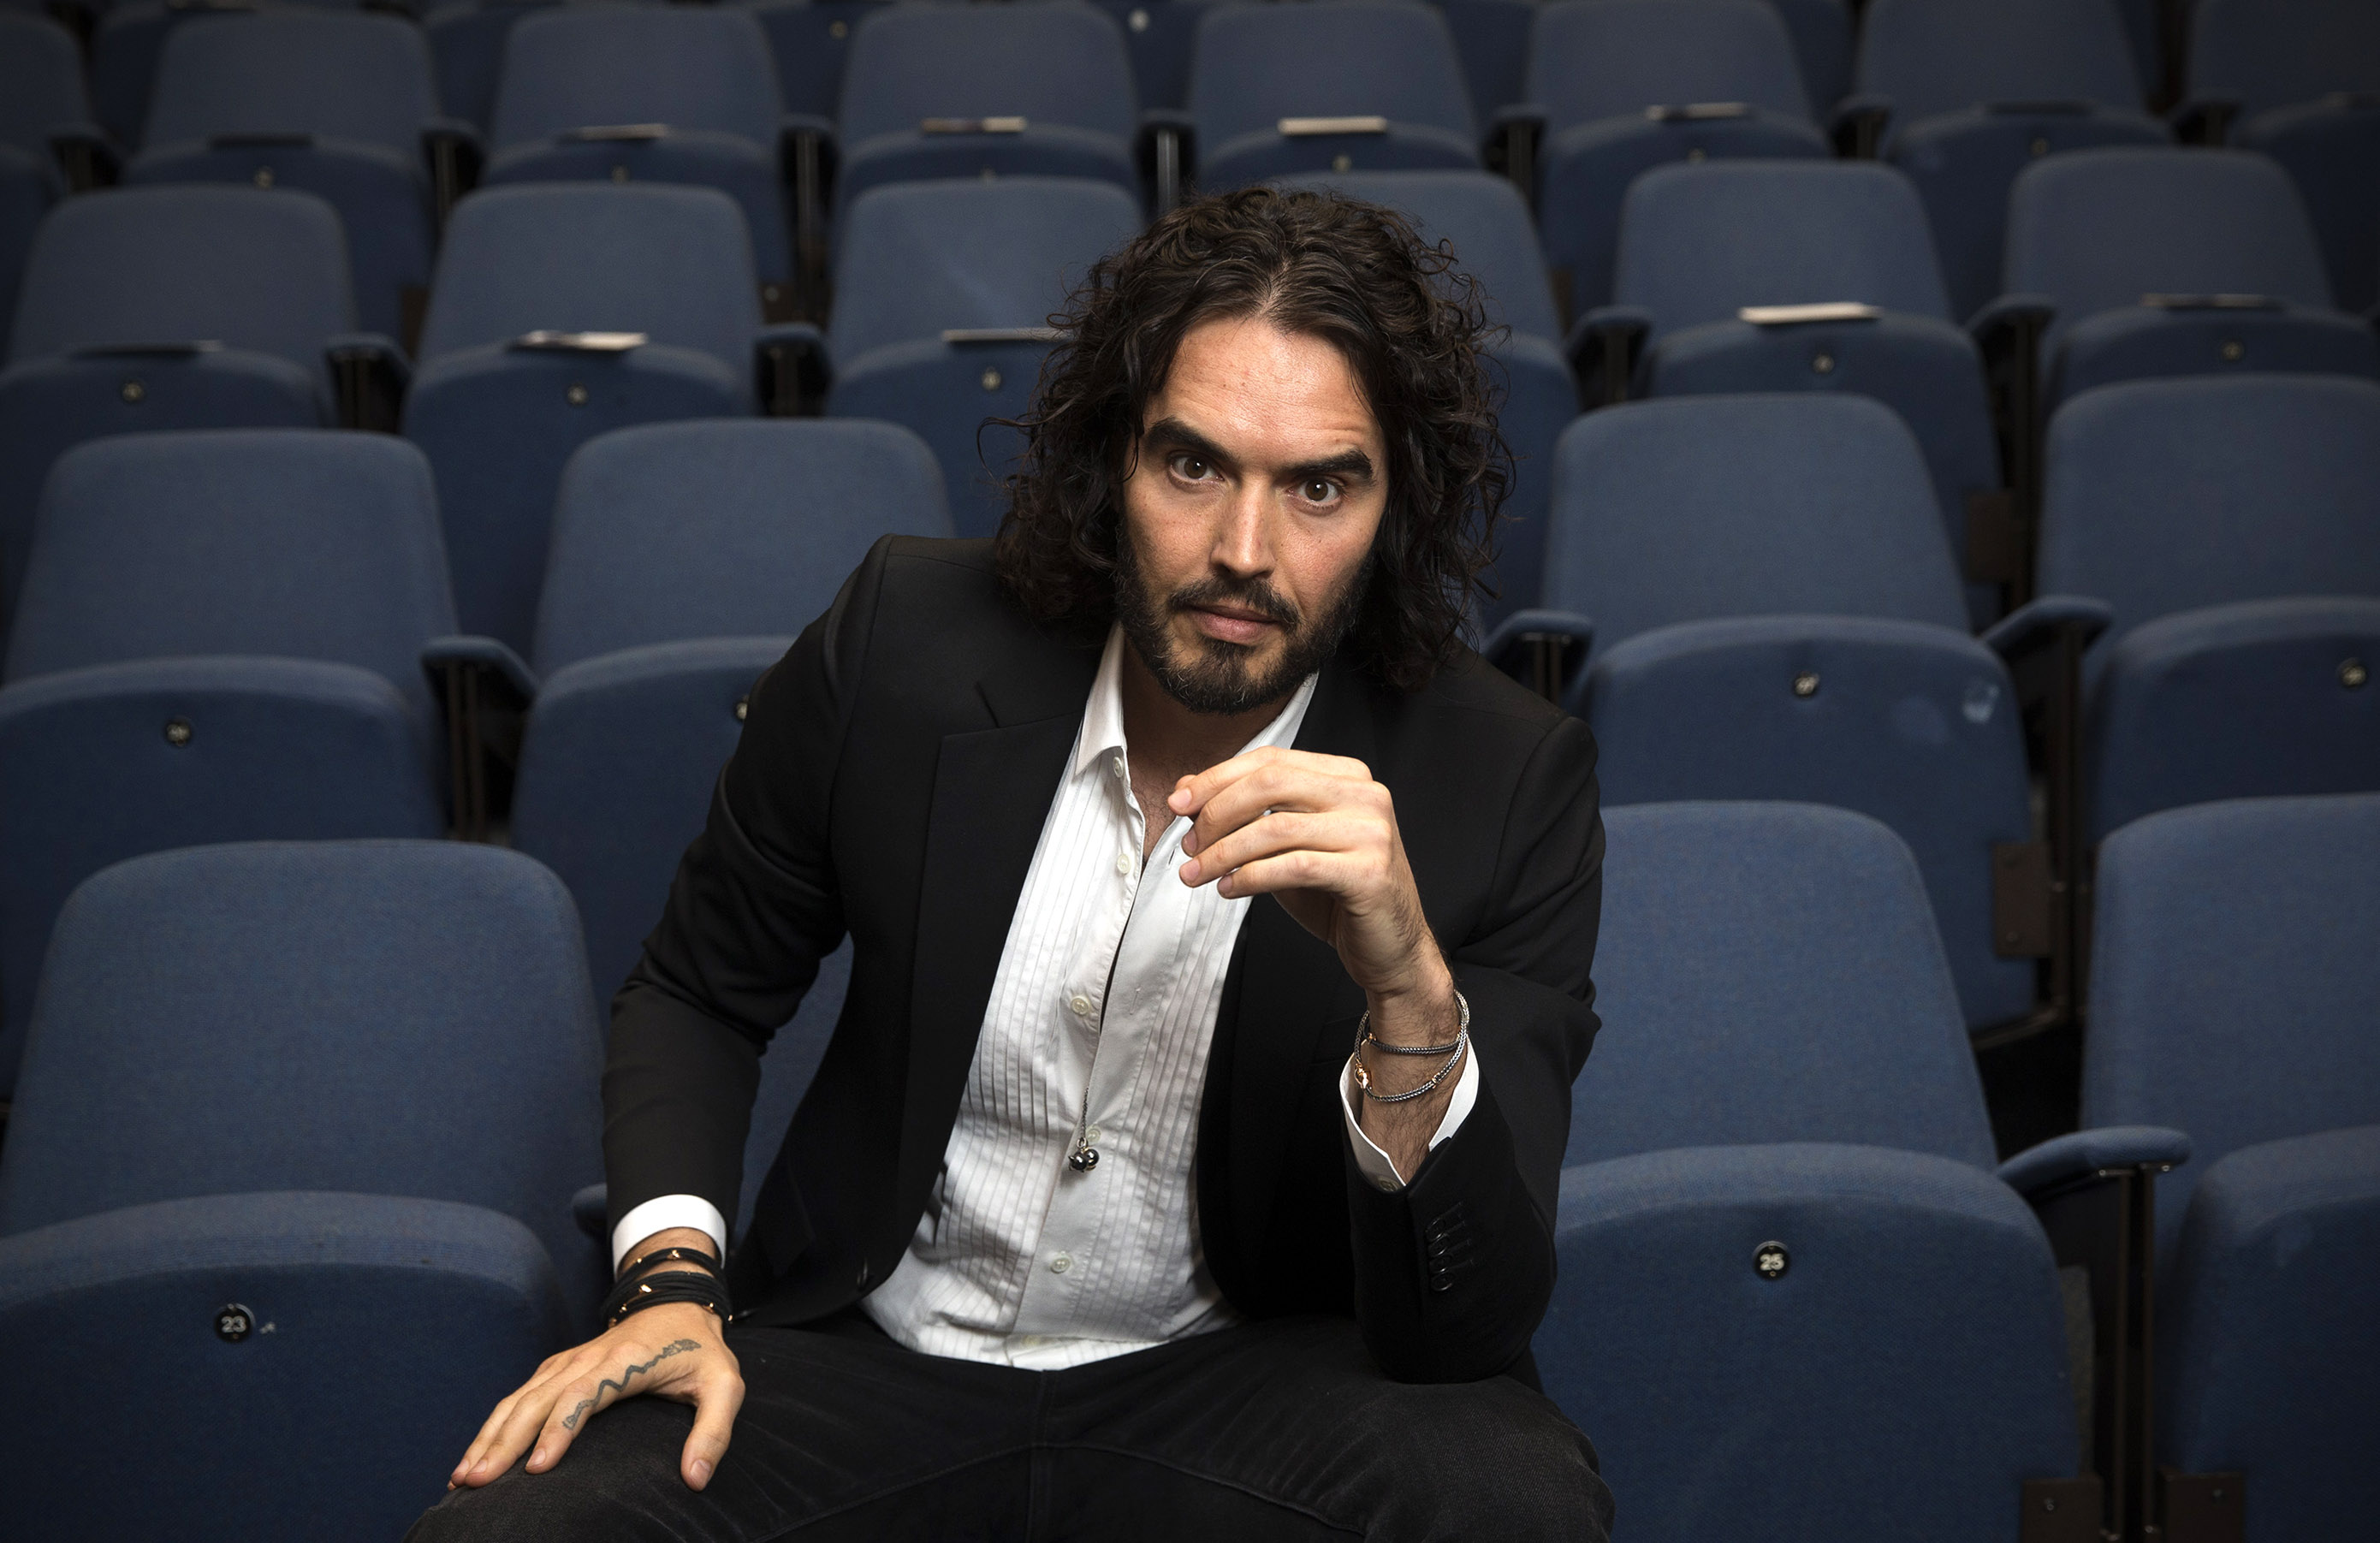 Russell Brand poses for photographs as he arrives to deliver The Reading Agency Lecture at The Institute of Education on Nov. 25, 2014 in London, England.